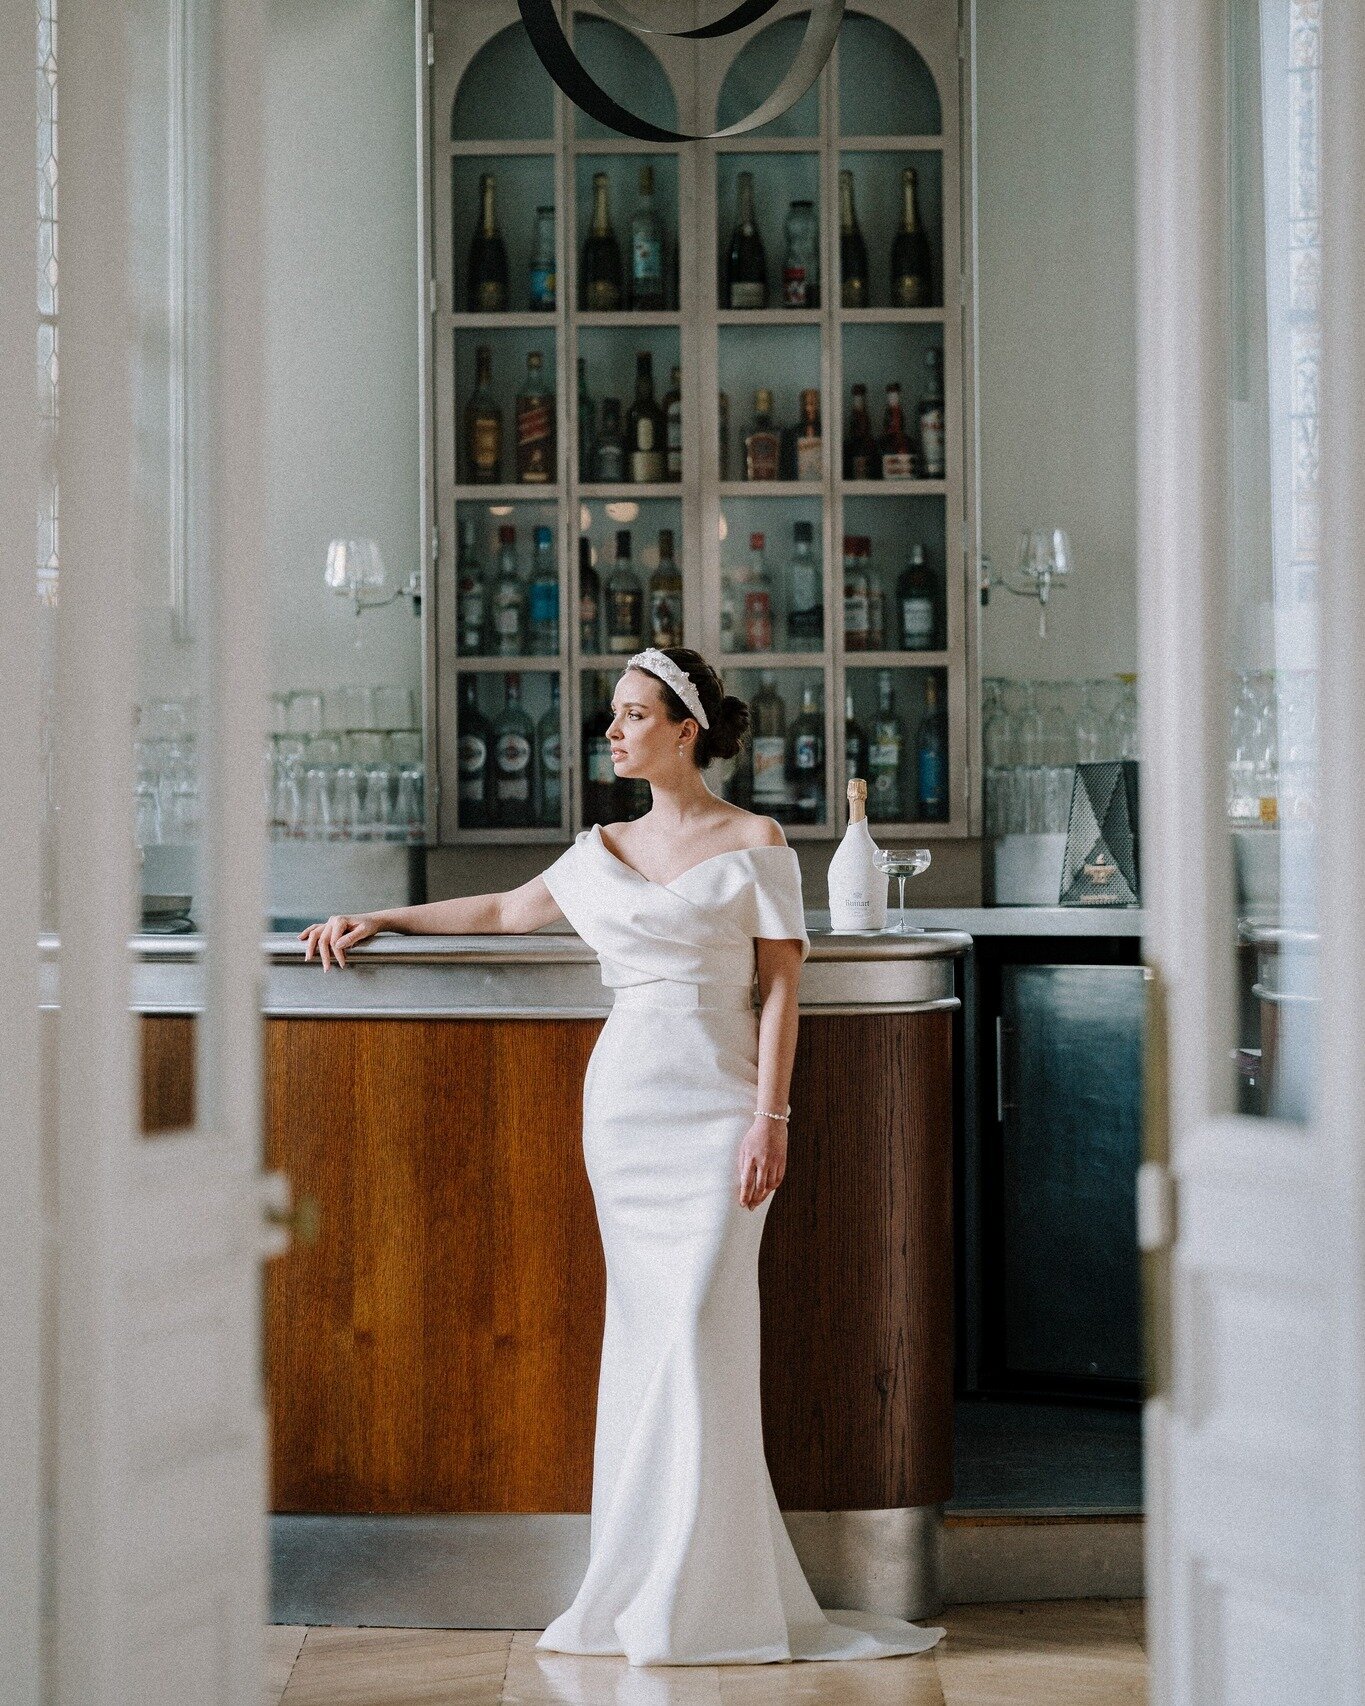 Shooting at chateau Cazine with our beautiful Charlotte, published on @amberandmuse_hochzeitsguide today. It's always a pleasure to see the excellent work of the team published here.
-
-
Photographie: @vivien_malagnat
Vid&eacute;o: @sandycluzaud
Orga